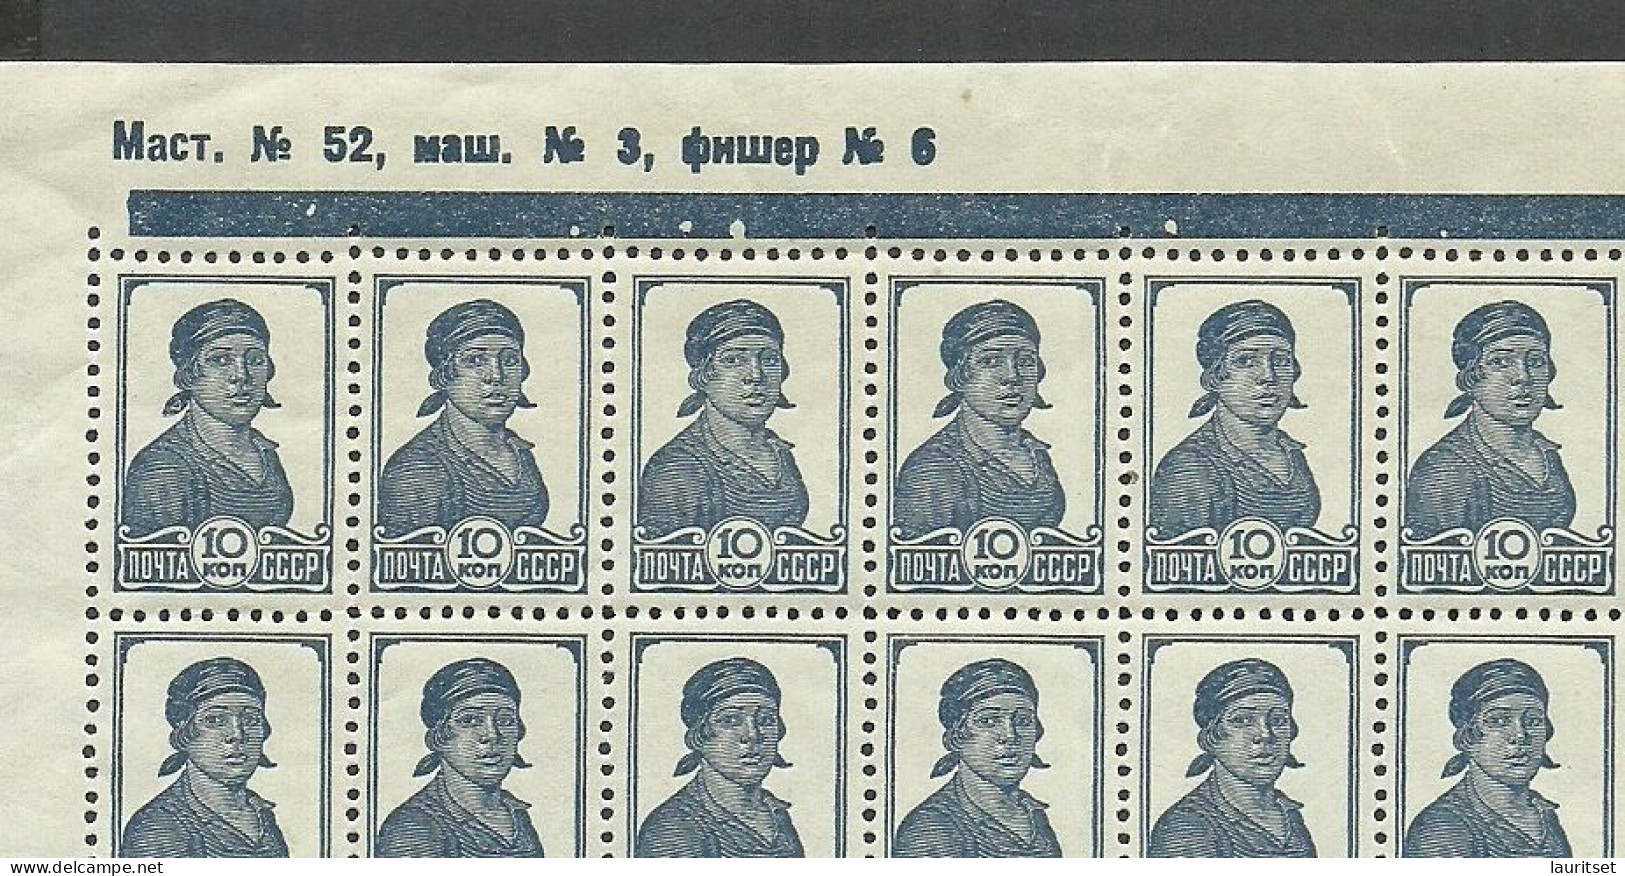 RUSSLAND RUSSIA 1937 Michel 677 I A Complete Sheet Of 100 Minus 3 Stamps MNH - Nuovi